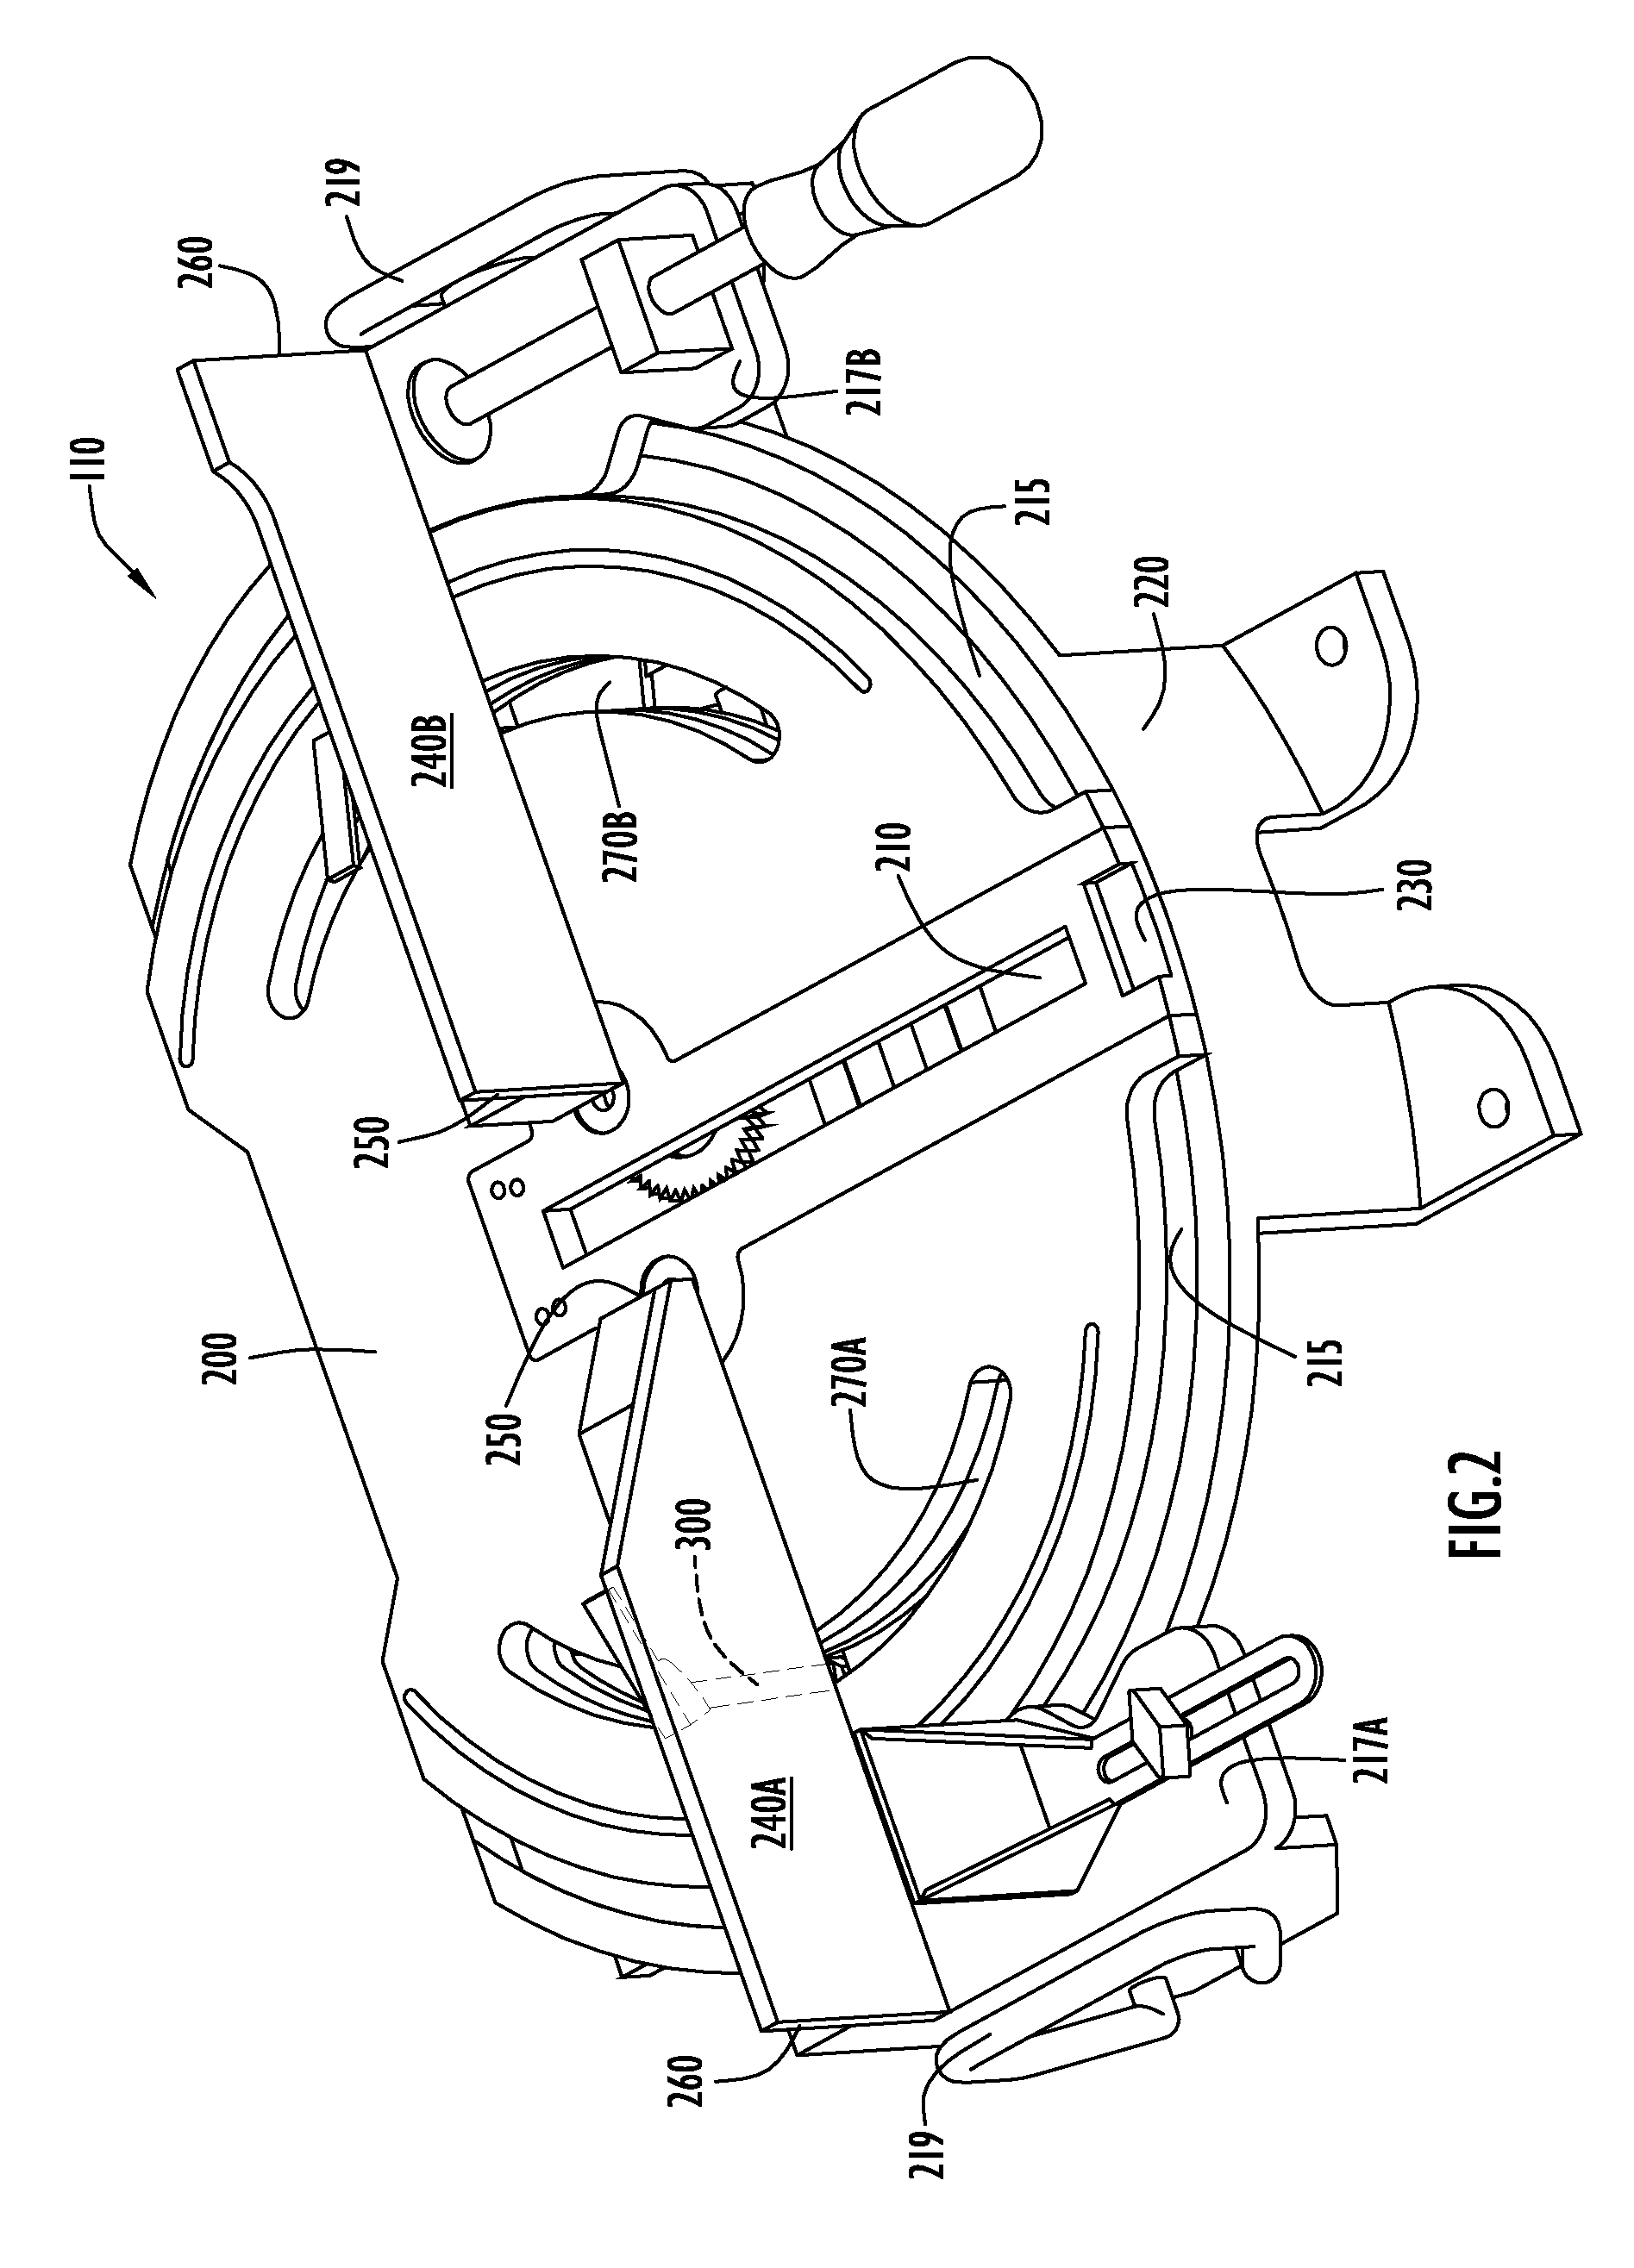 System for Forming a Miter Joint